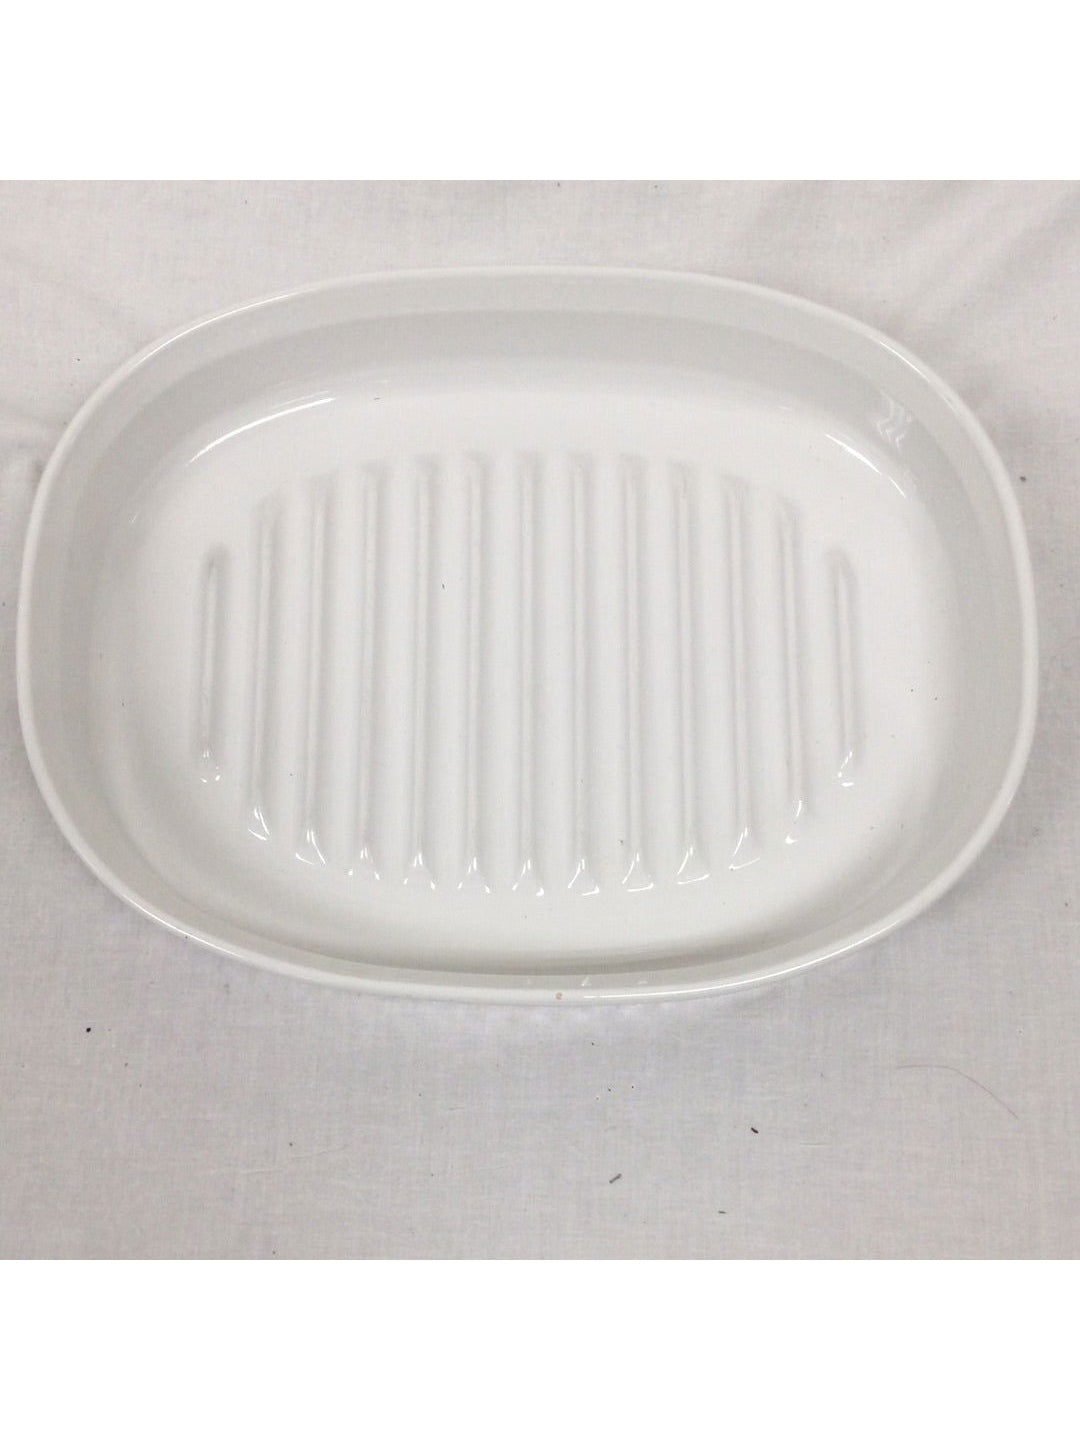 Corning Ware Oval Casserole Dish - The Kennedy Collective Thrift - 